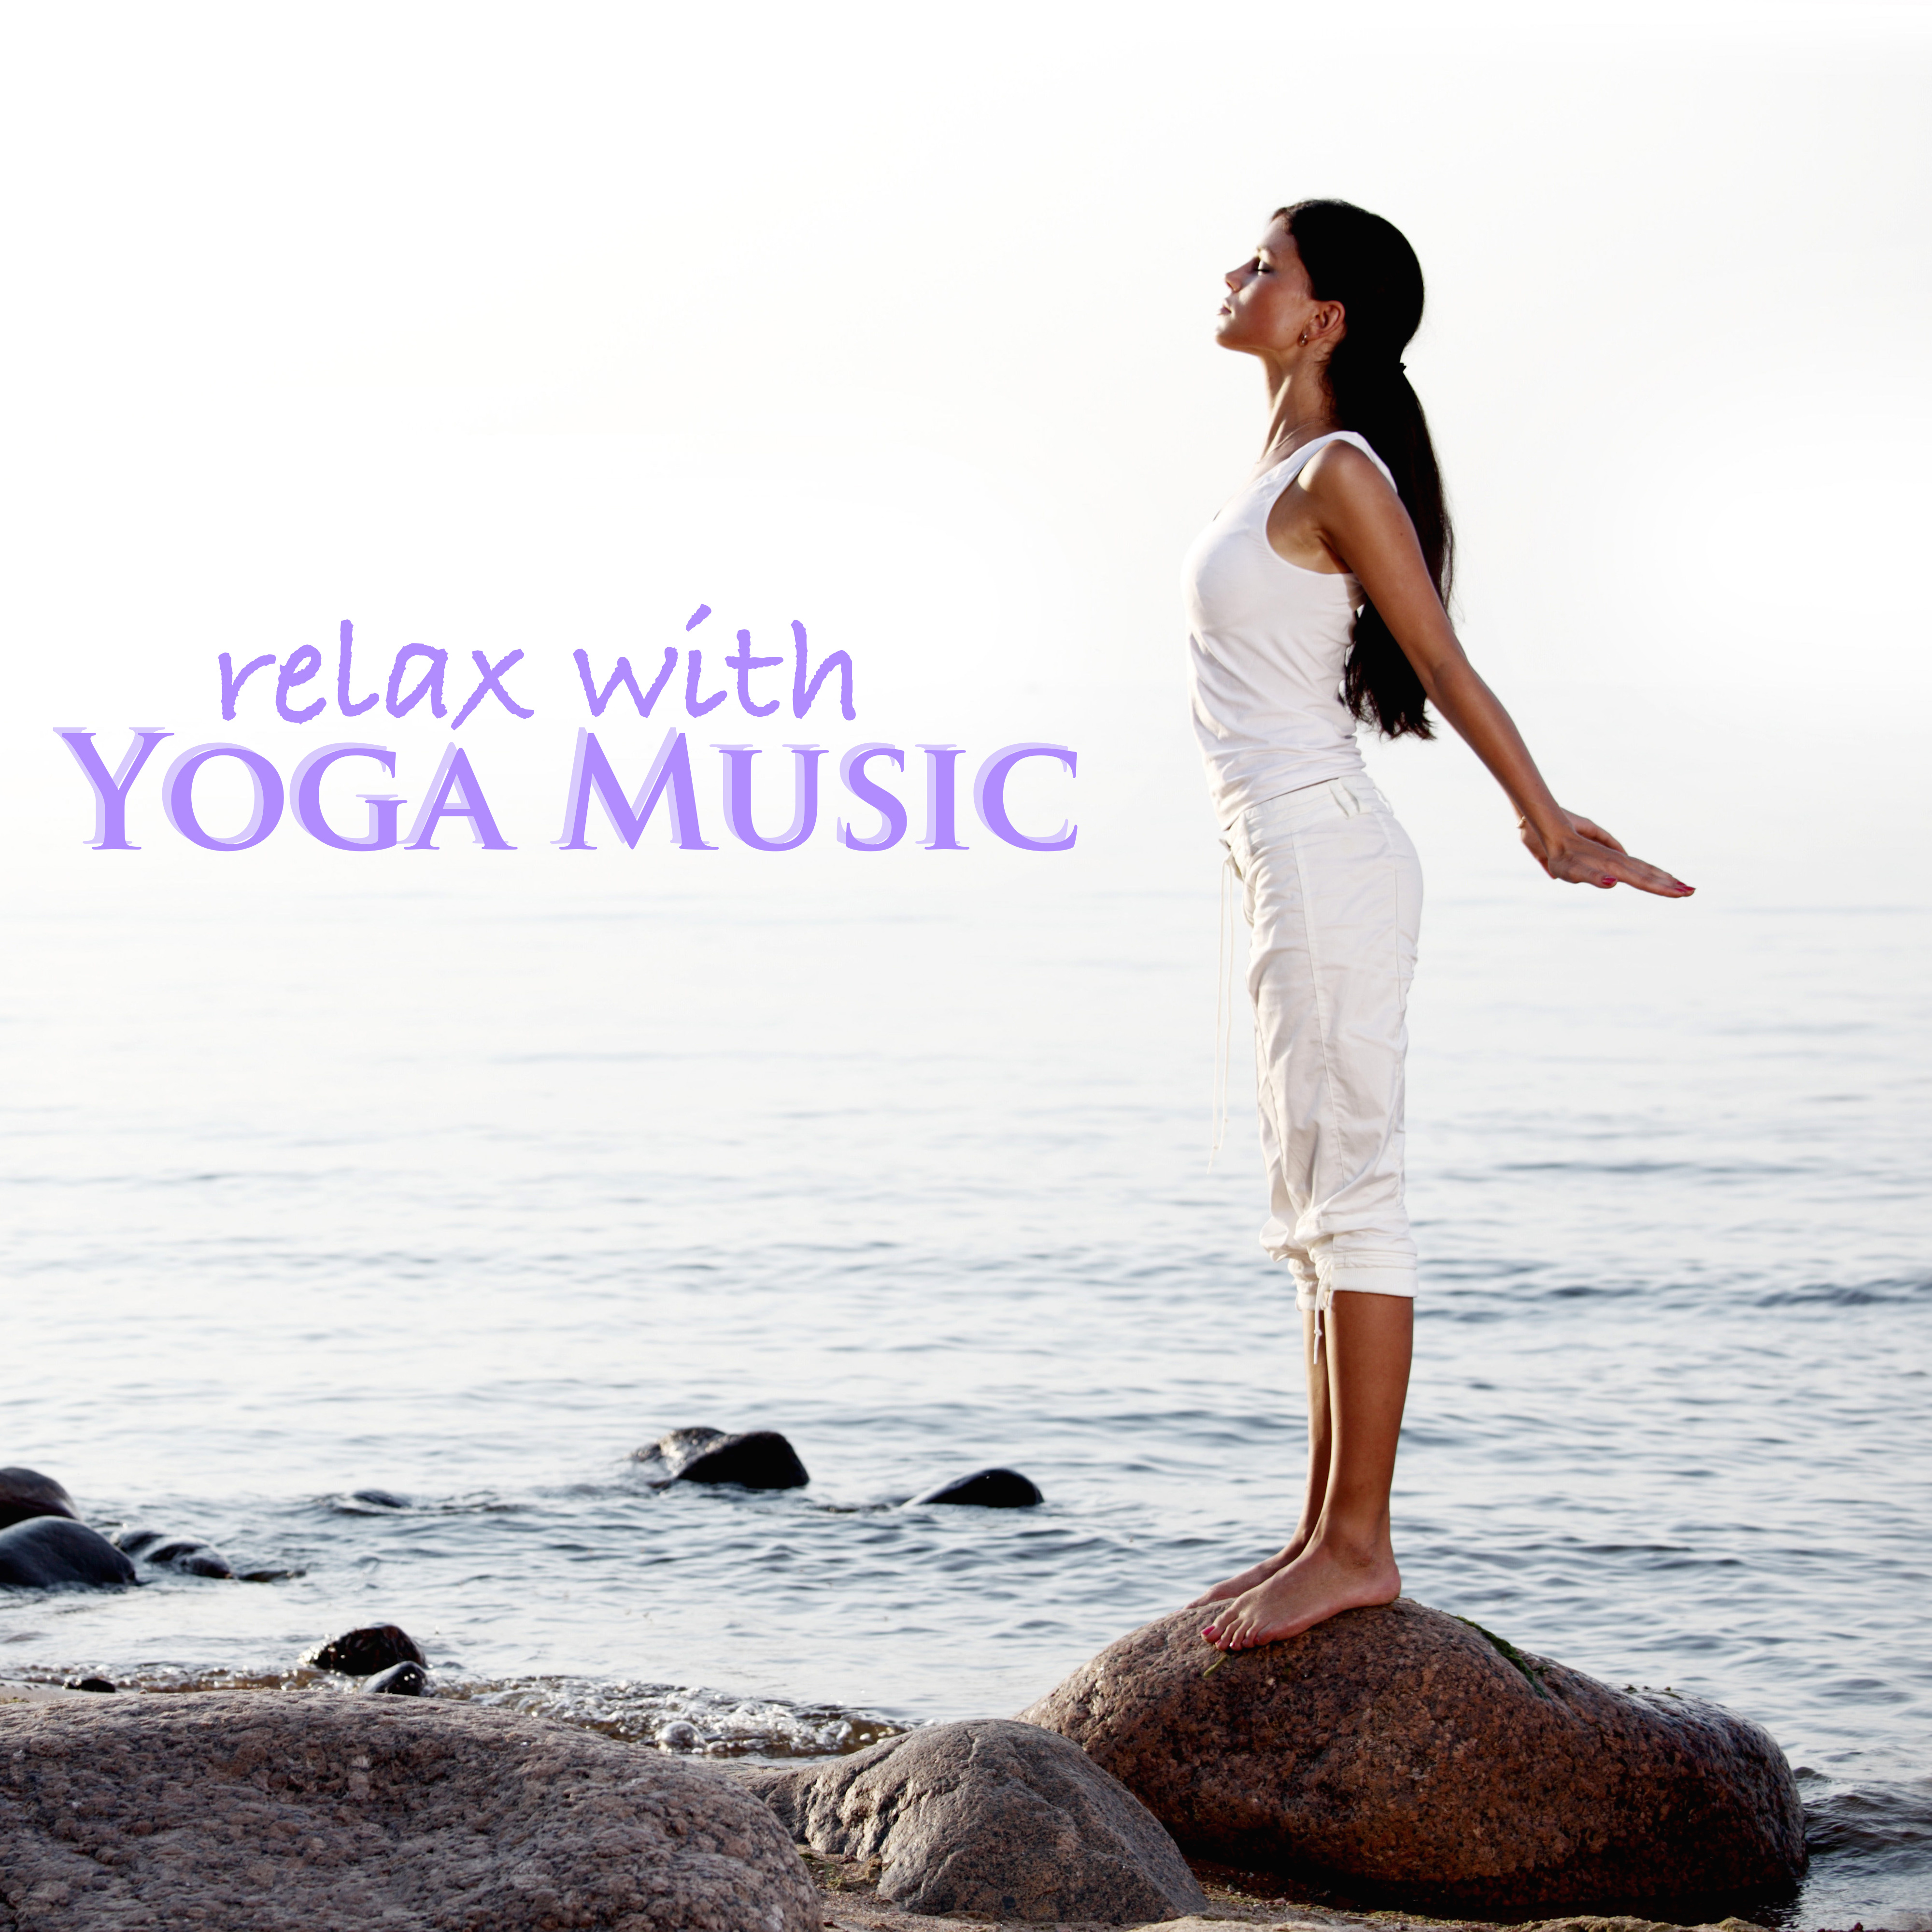 Relax with Yoga Music - Relaxing Mindfulness Meditation Music and Zen Garden Music